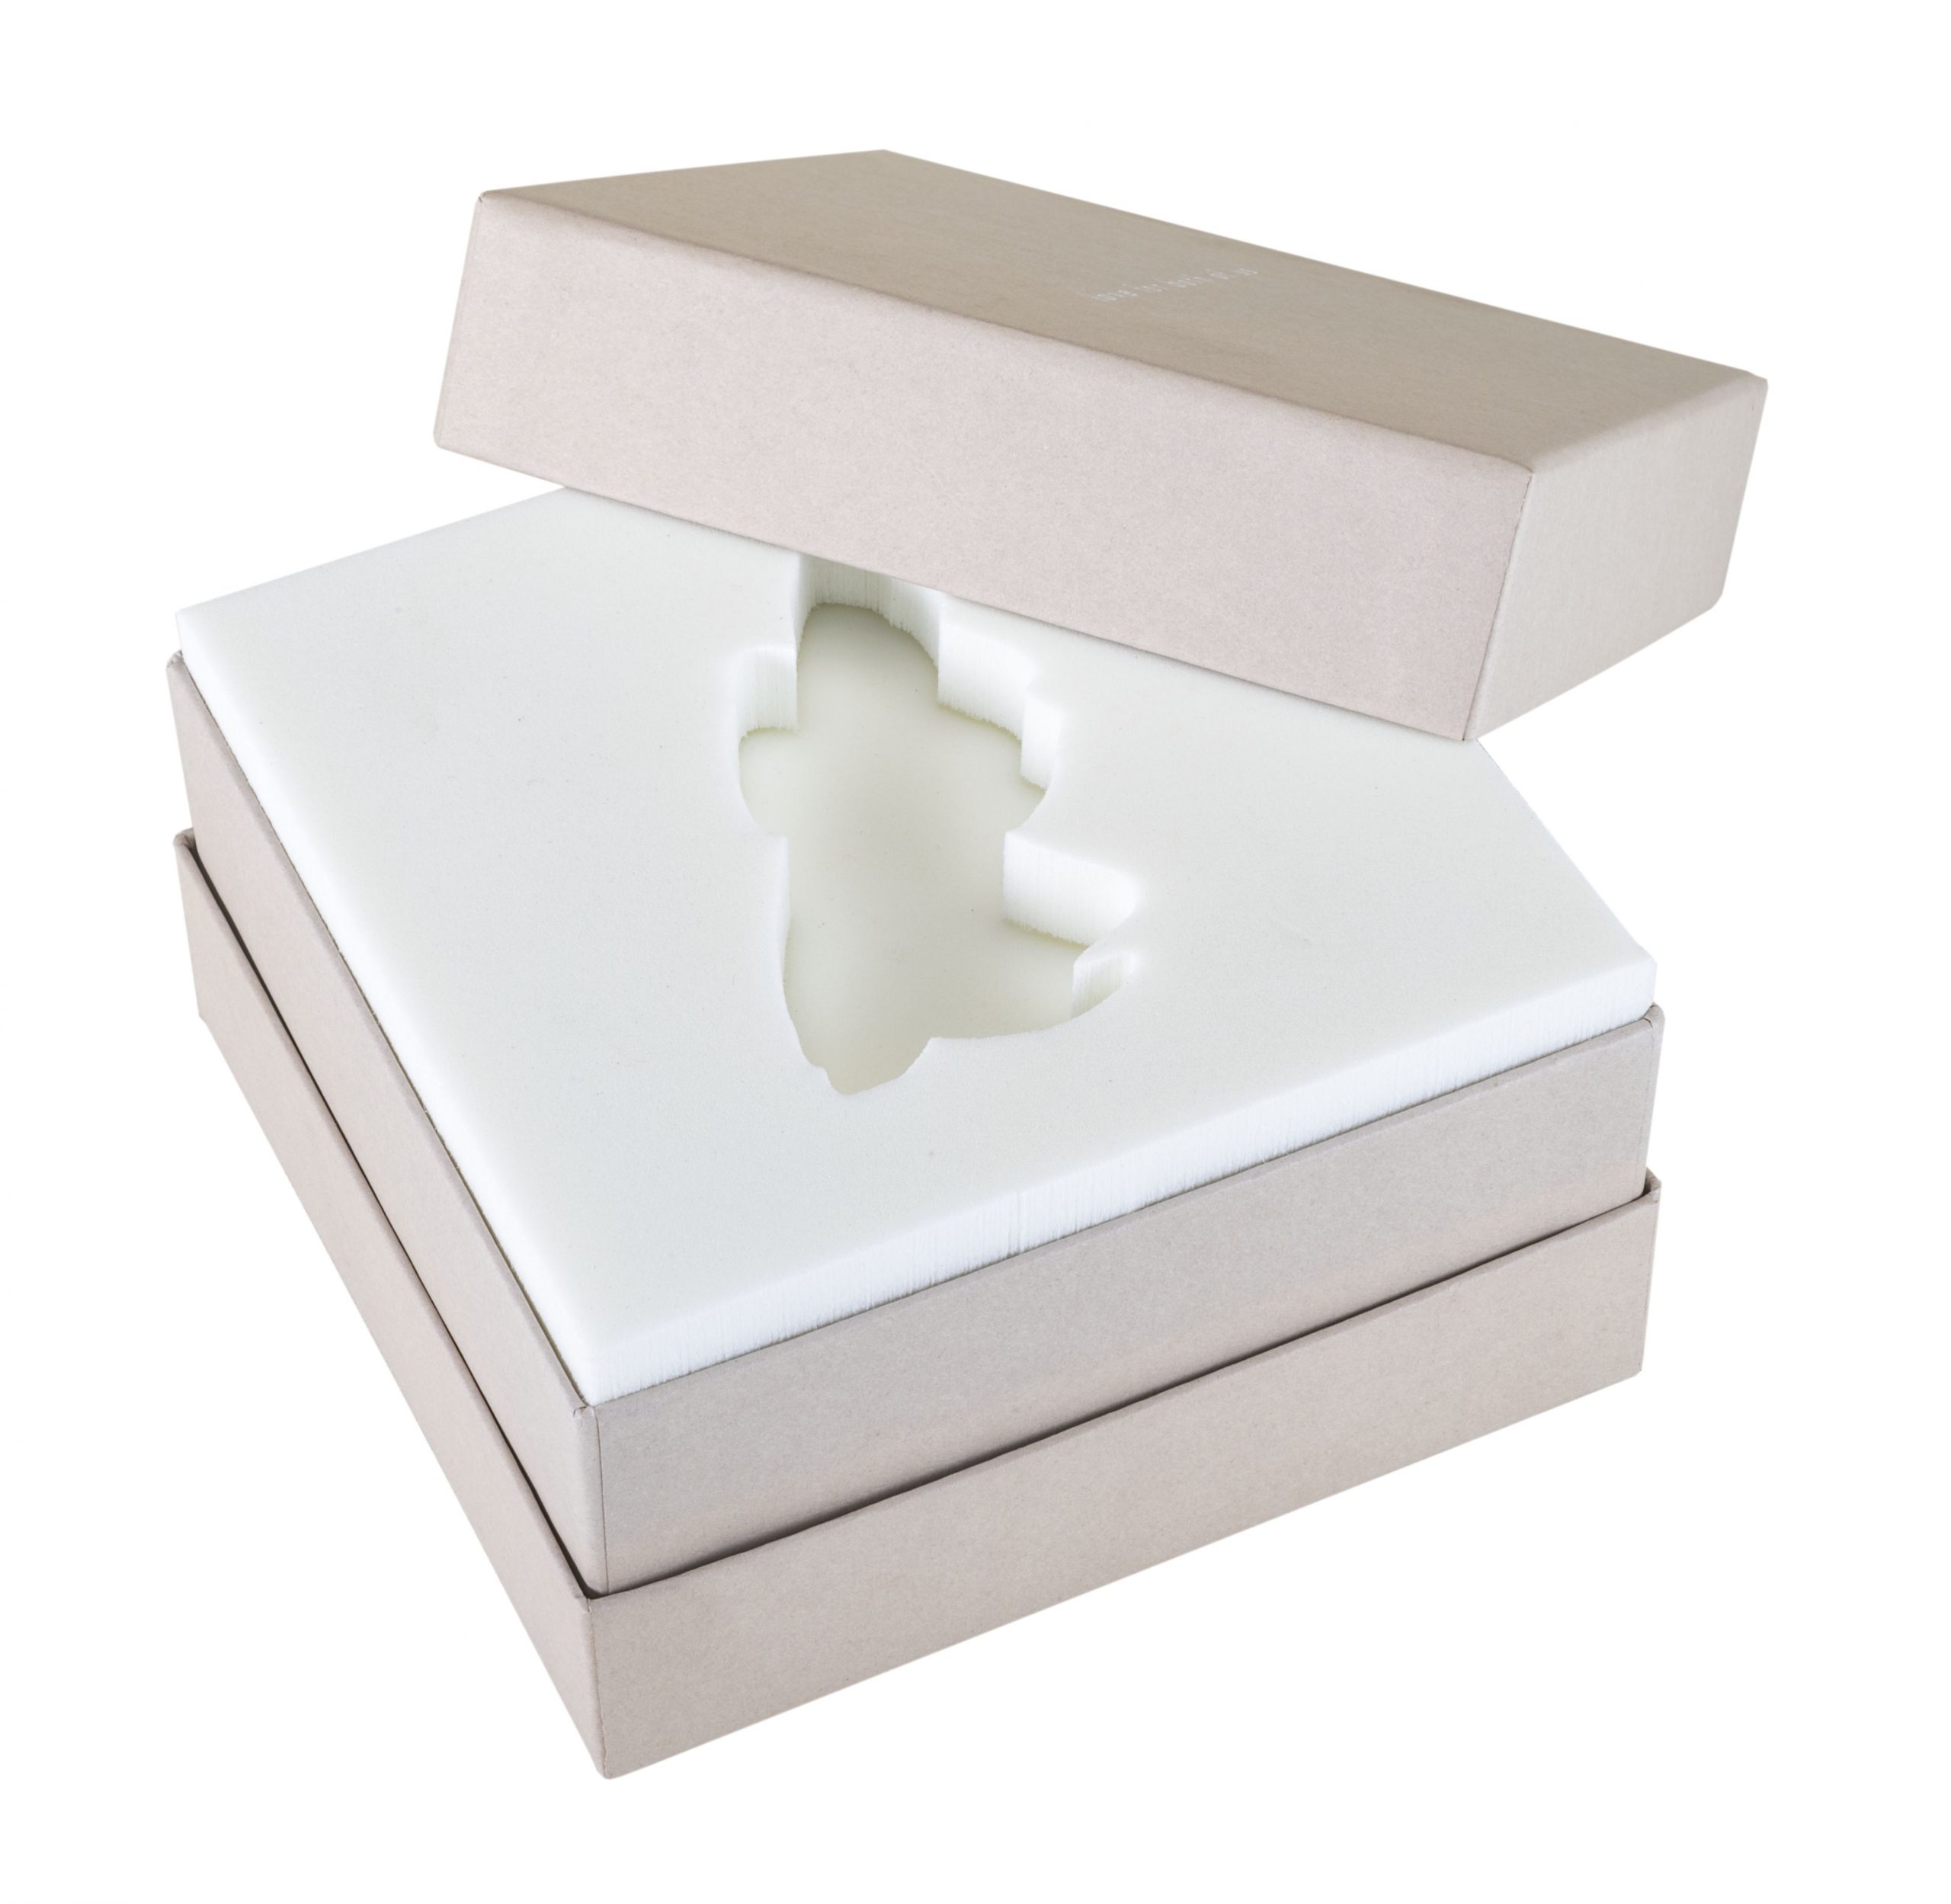 Foam Protective Packaging